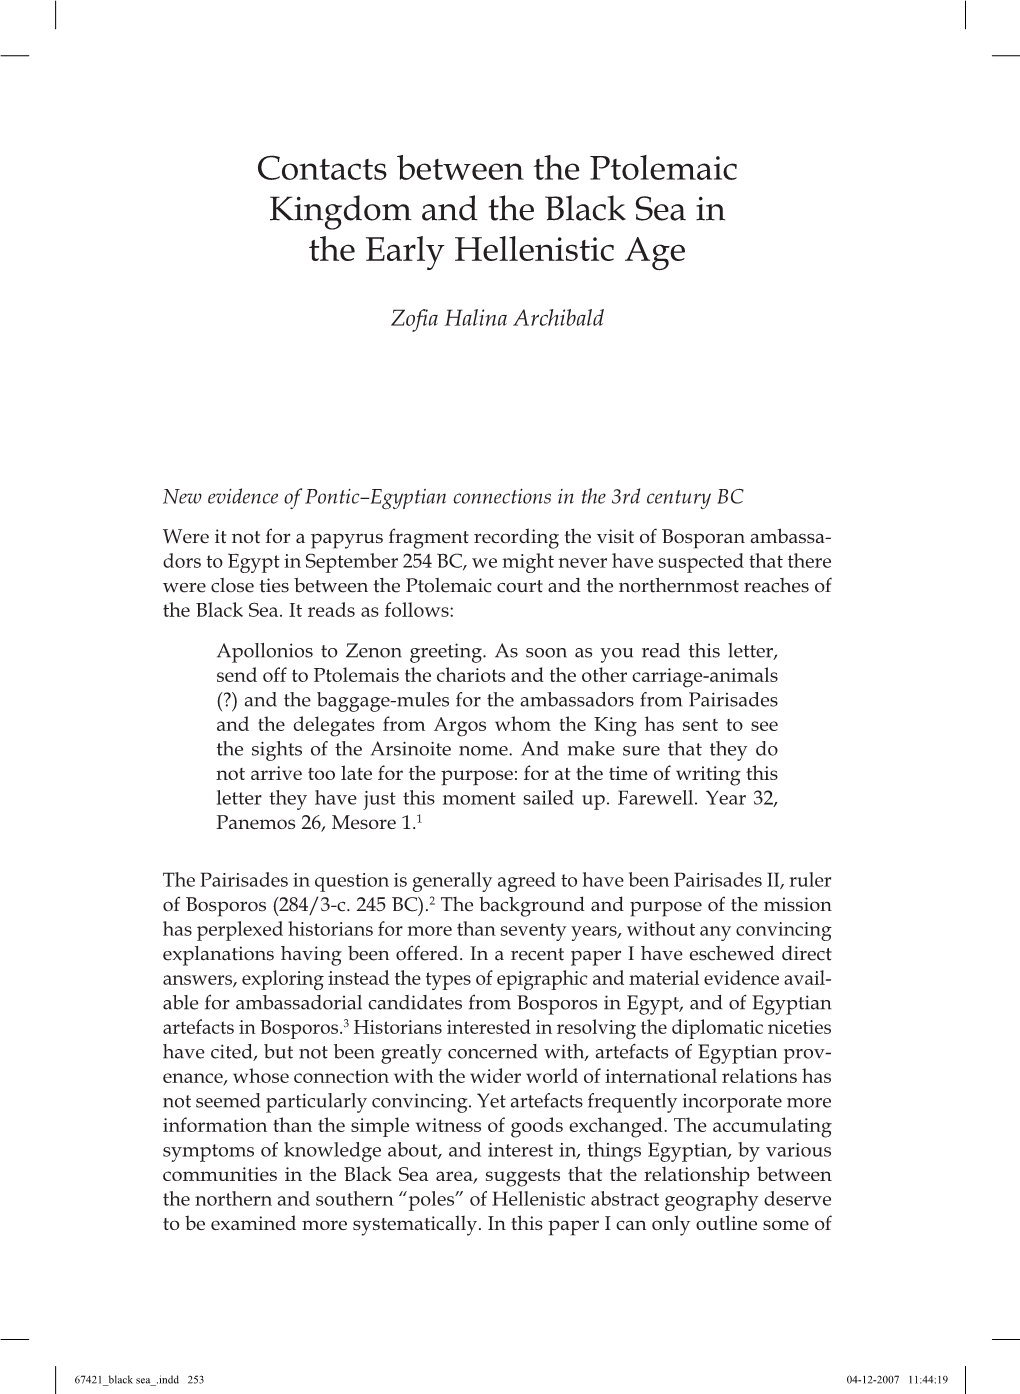 Contacts Between the Ptolemaic Kingdom and the Black Sea in the Early Hellenistic Age